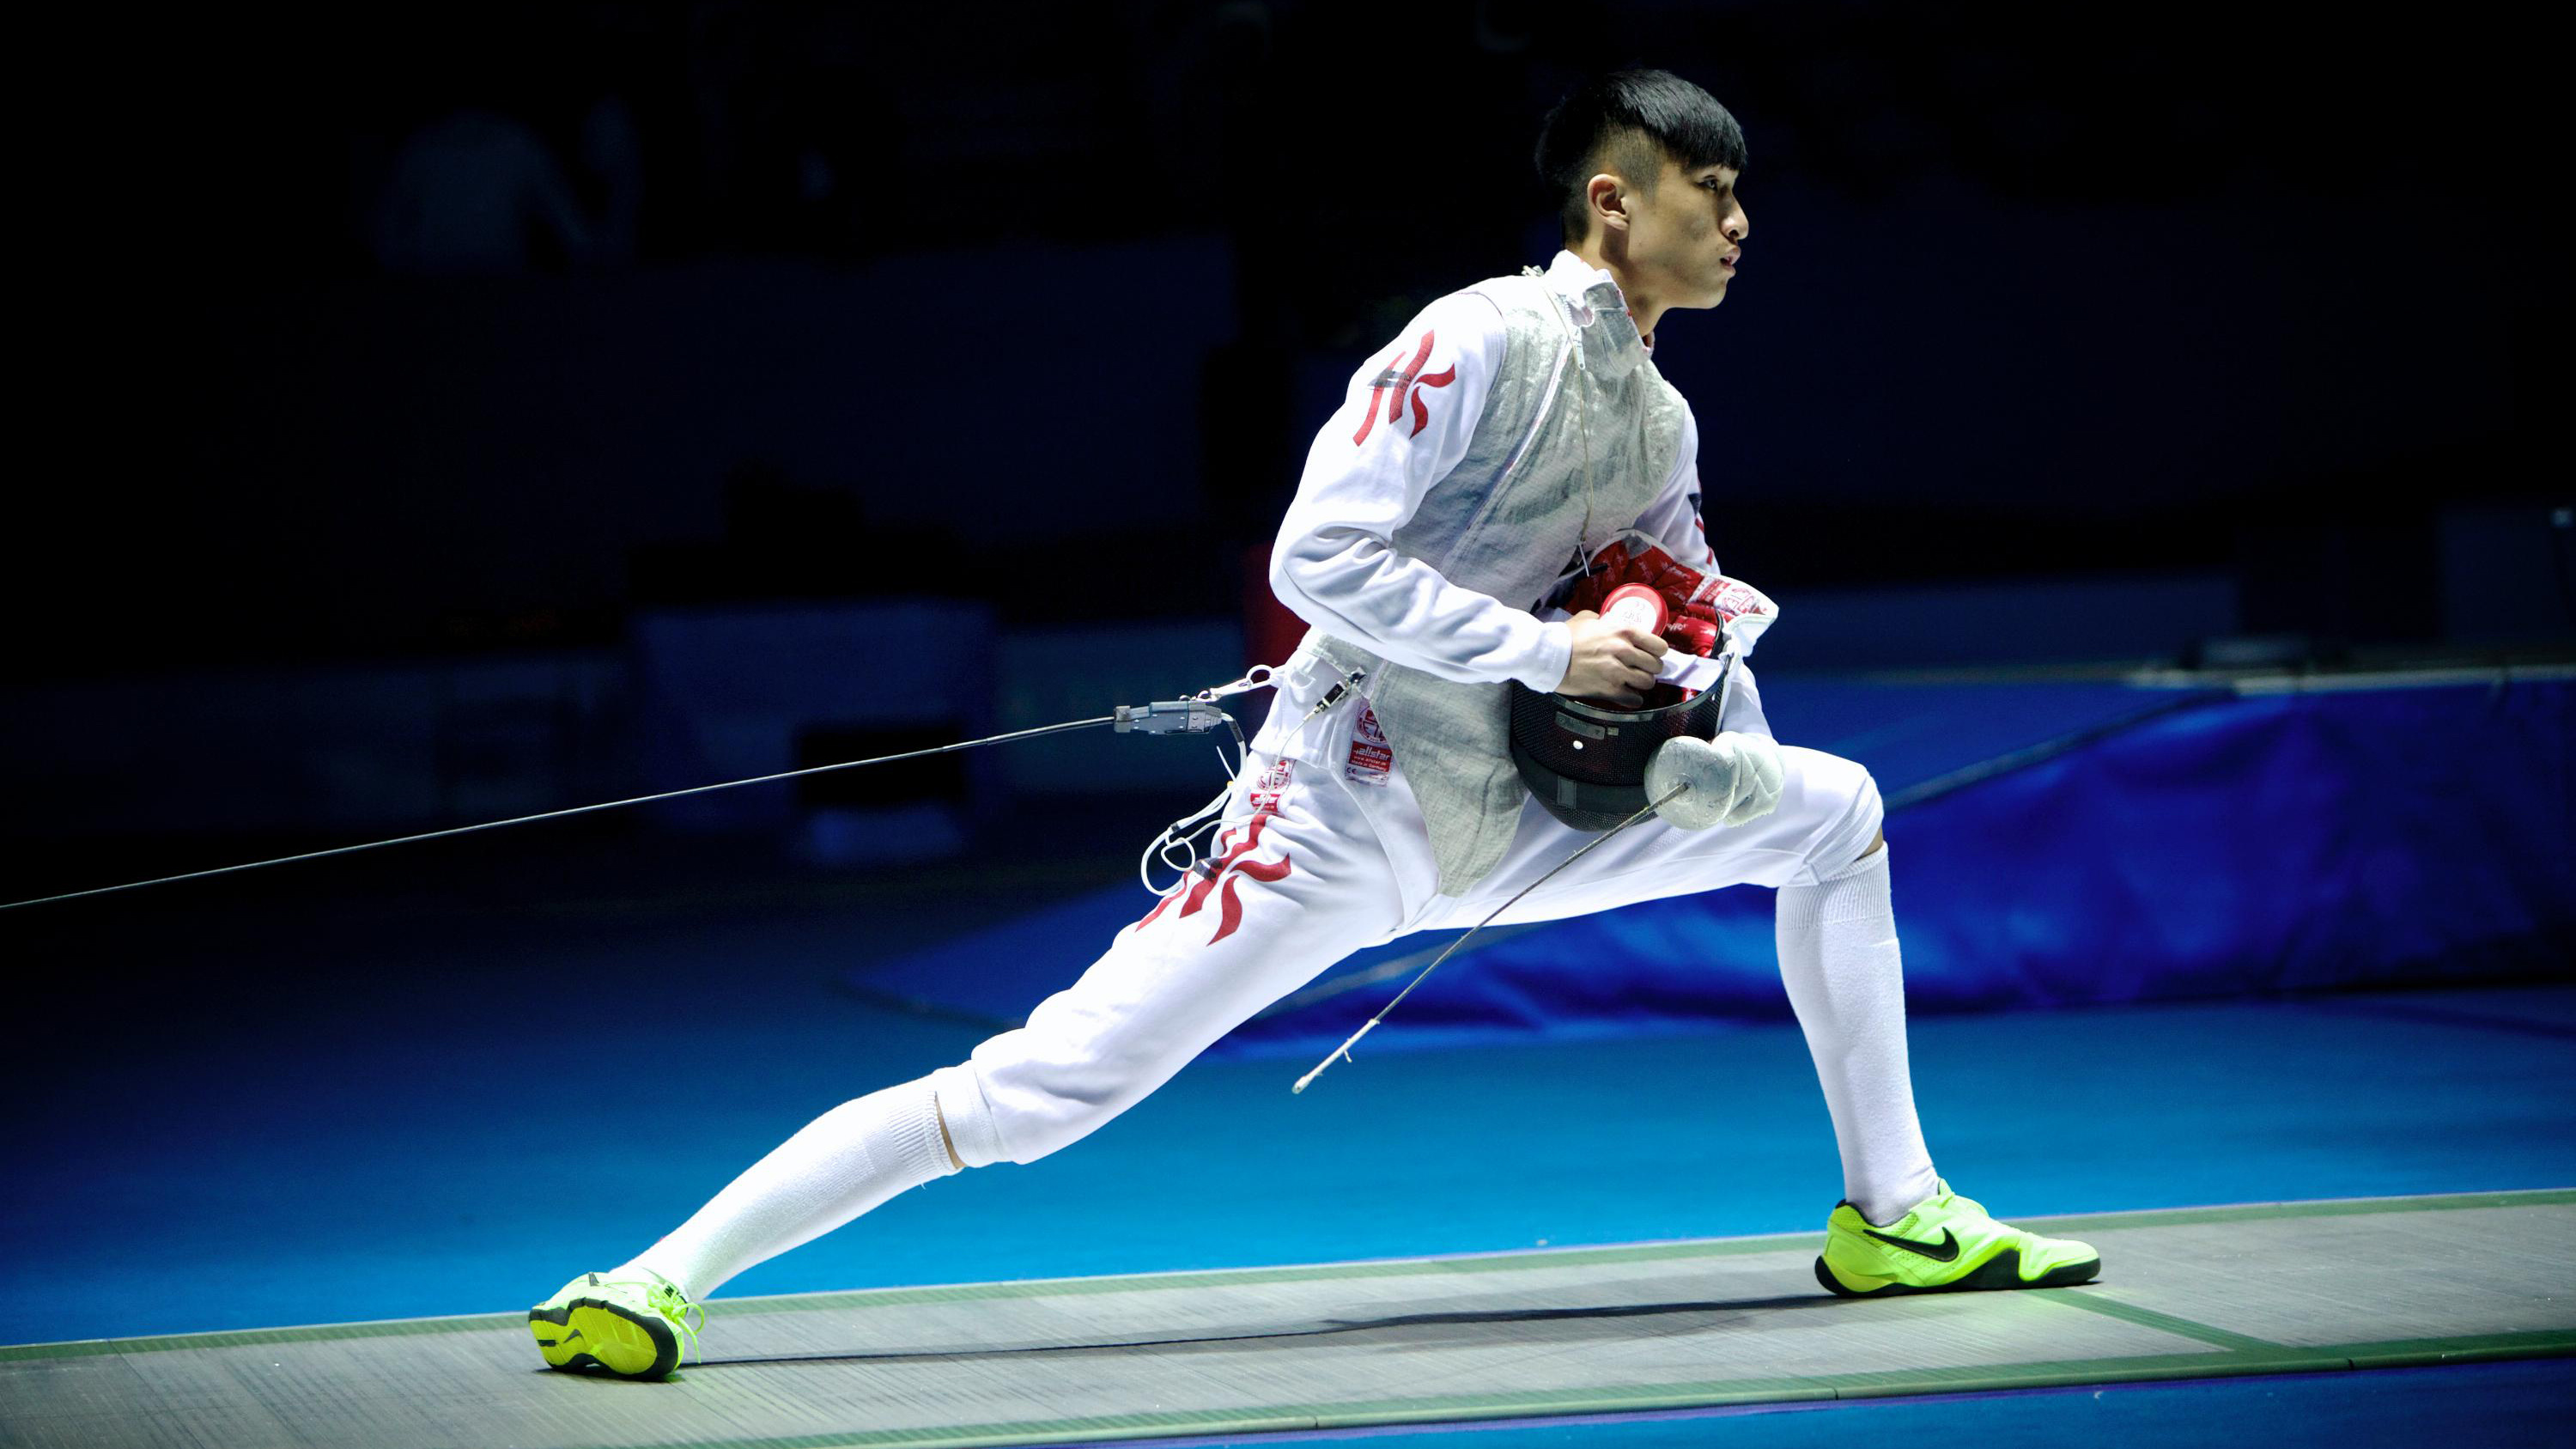 Fencing: Chinese Olympic fencer prepares to fight in a foil duel, A competitive combat sport. 3000x1690 HD Wallpaper.